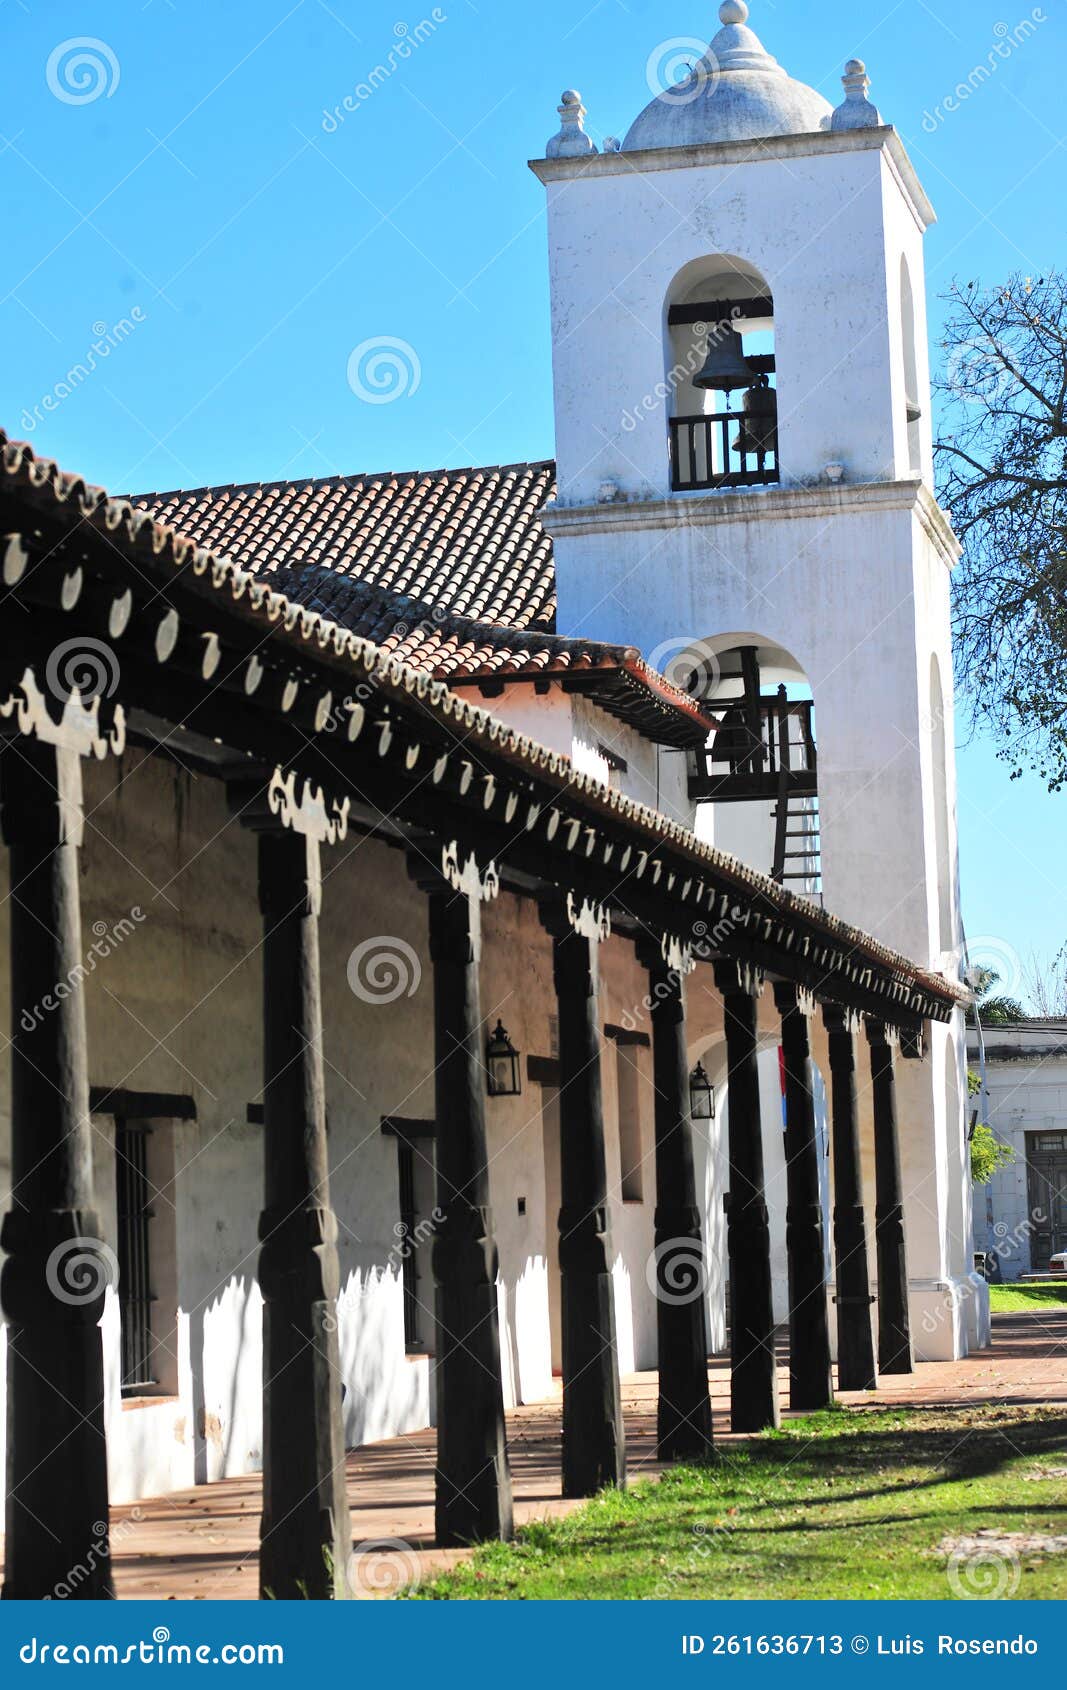 the convent of san francisco is a catholic temple and convent in the city of santa fe, argentina. it occupies a property that